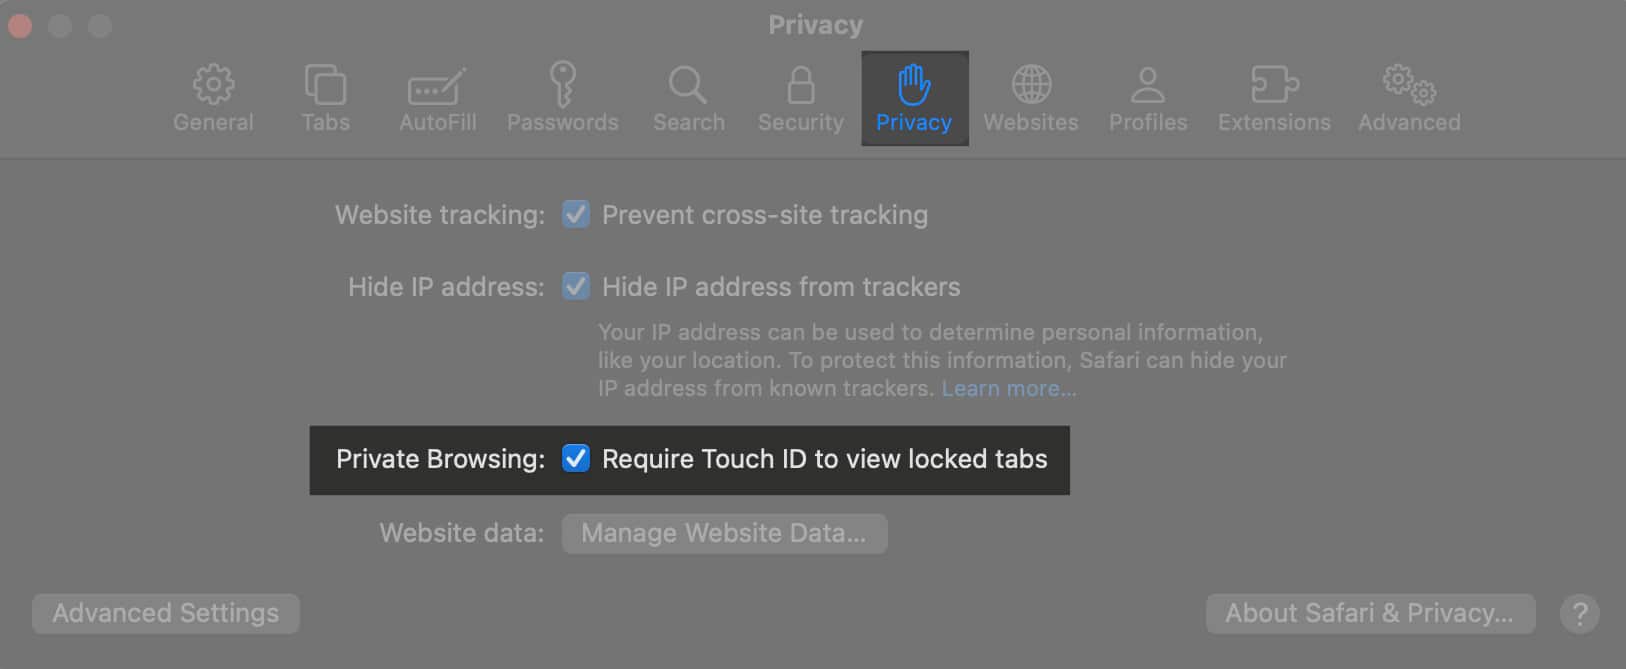 Go to Privacy, enable Require Touch ID to view locked tabs